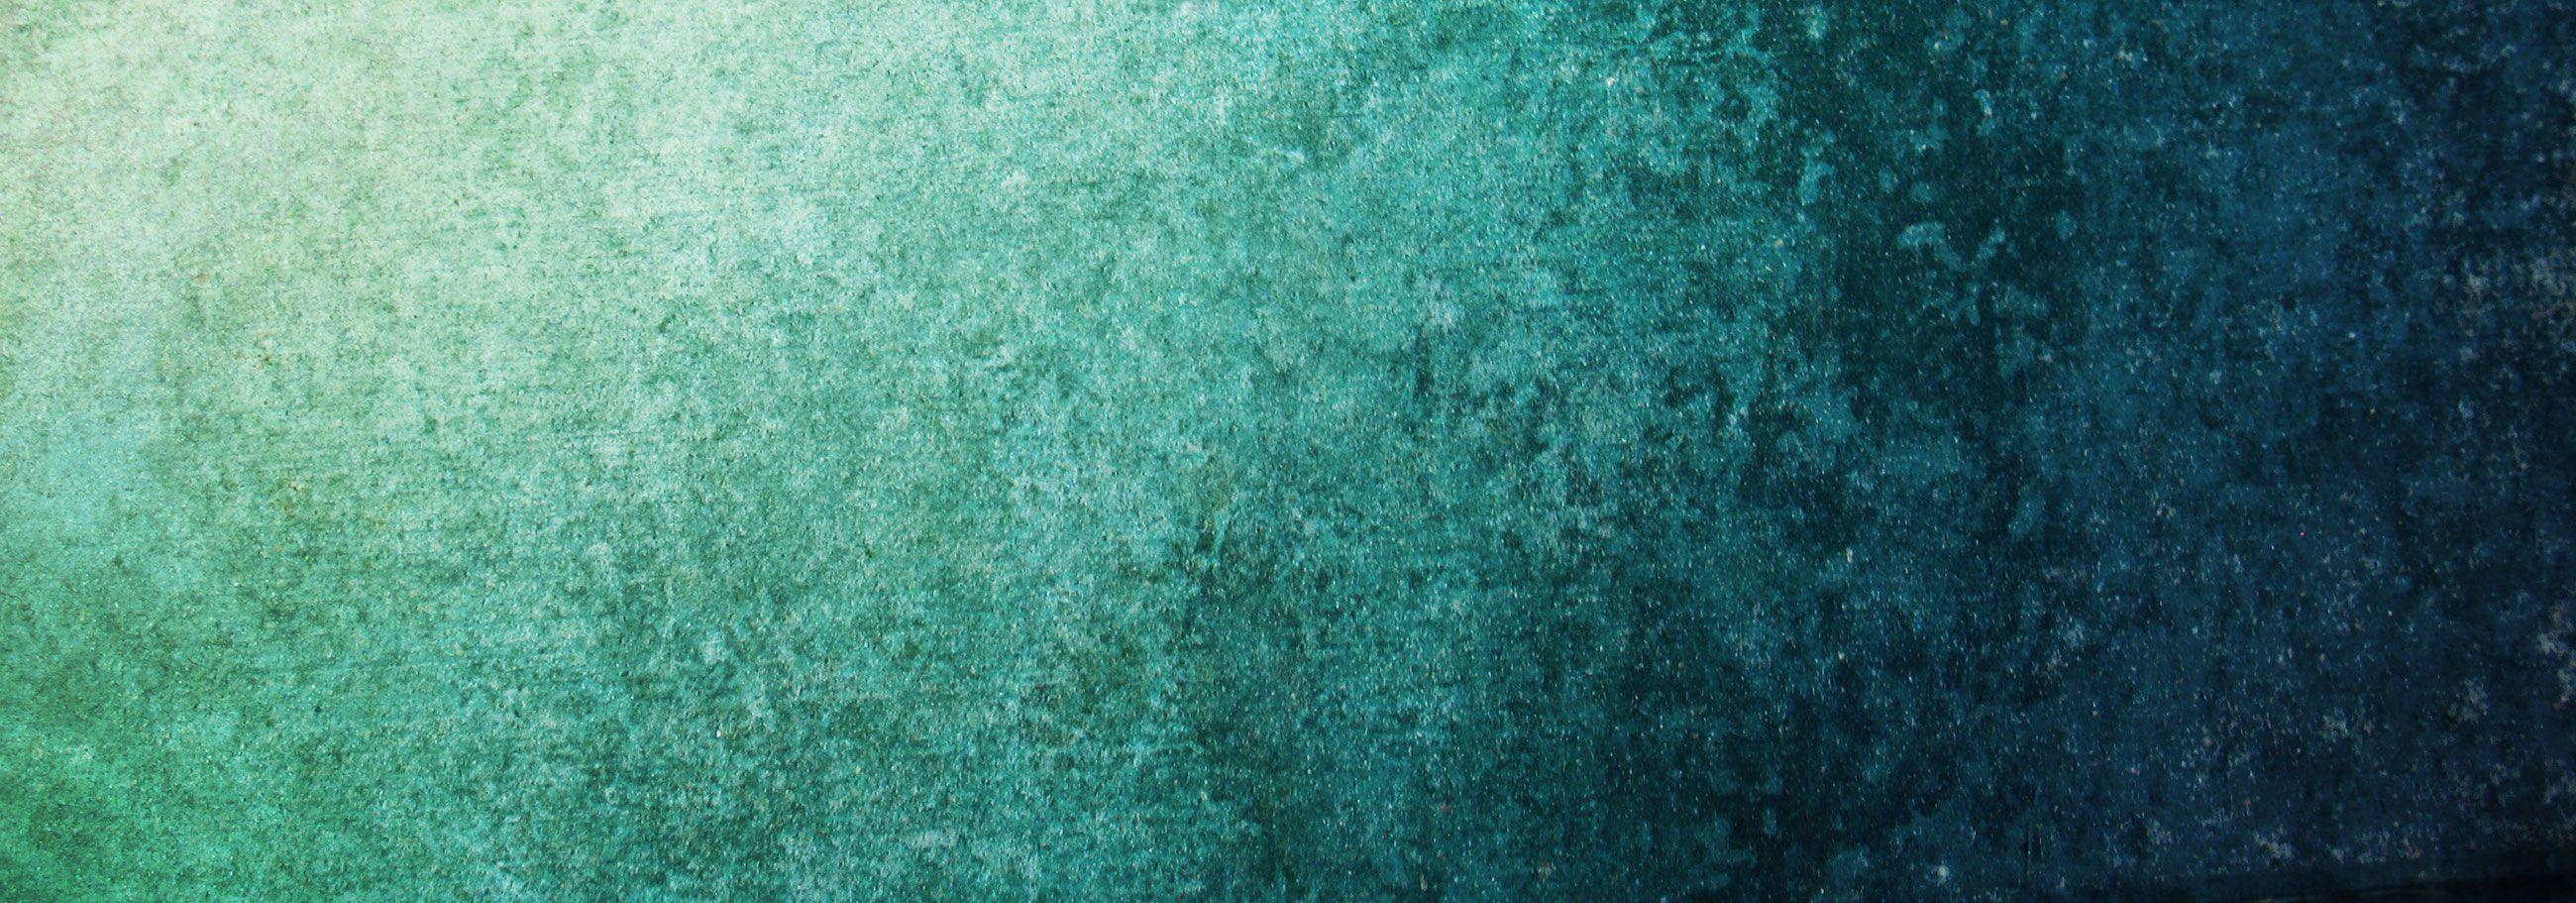 Grunge Green Wall Texture And Background Family Martial